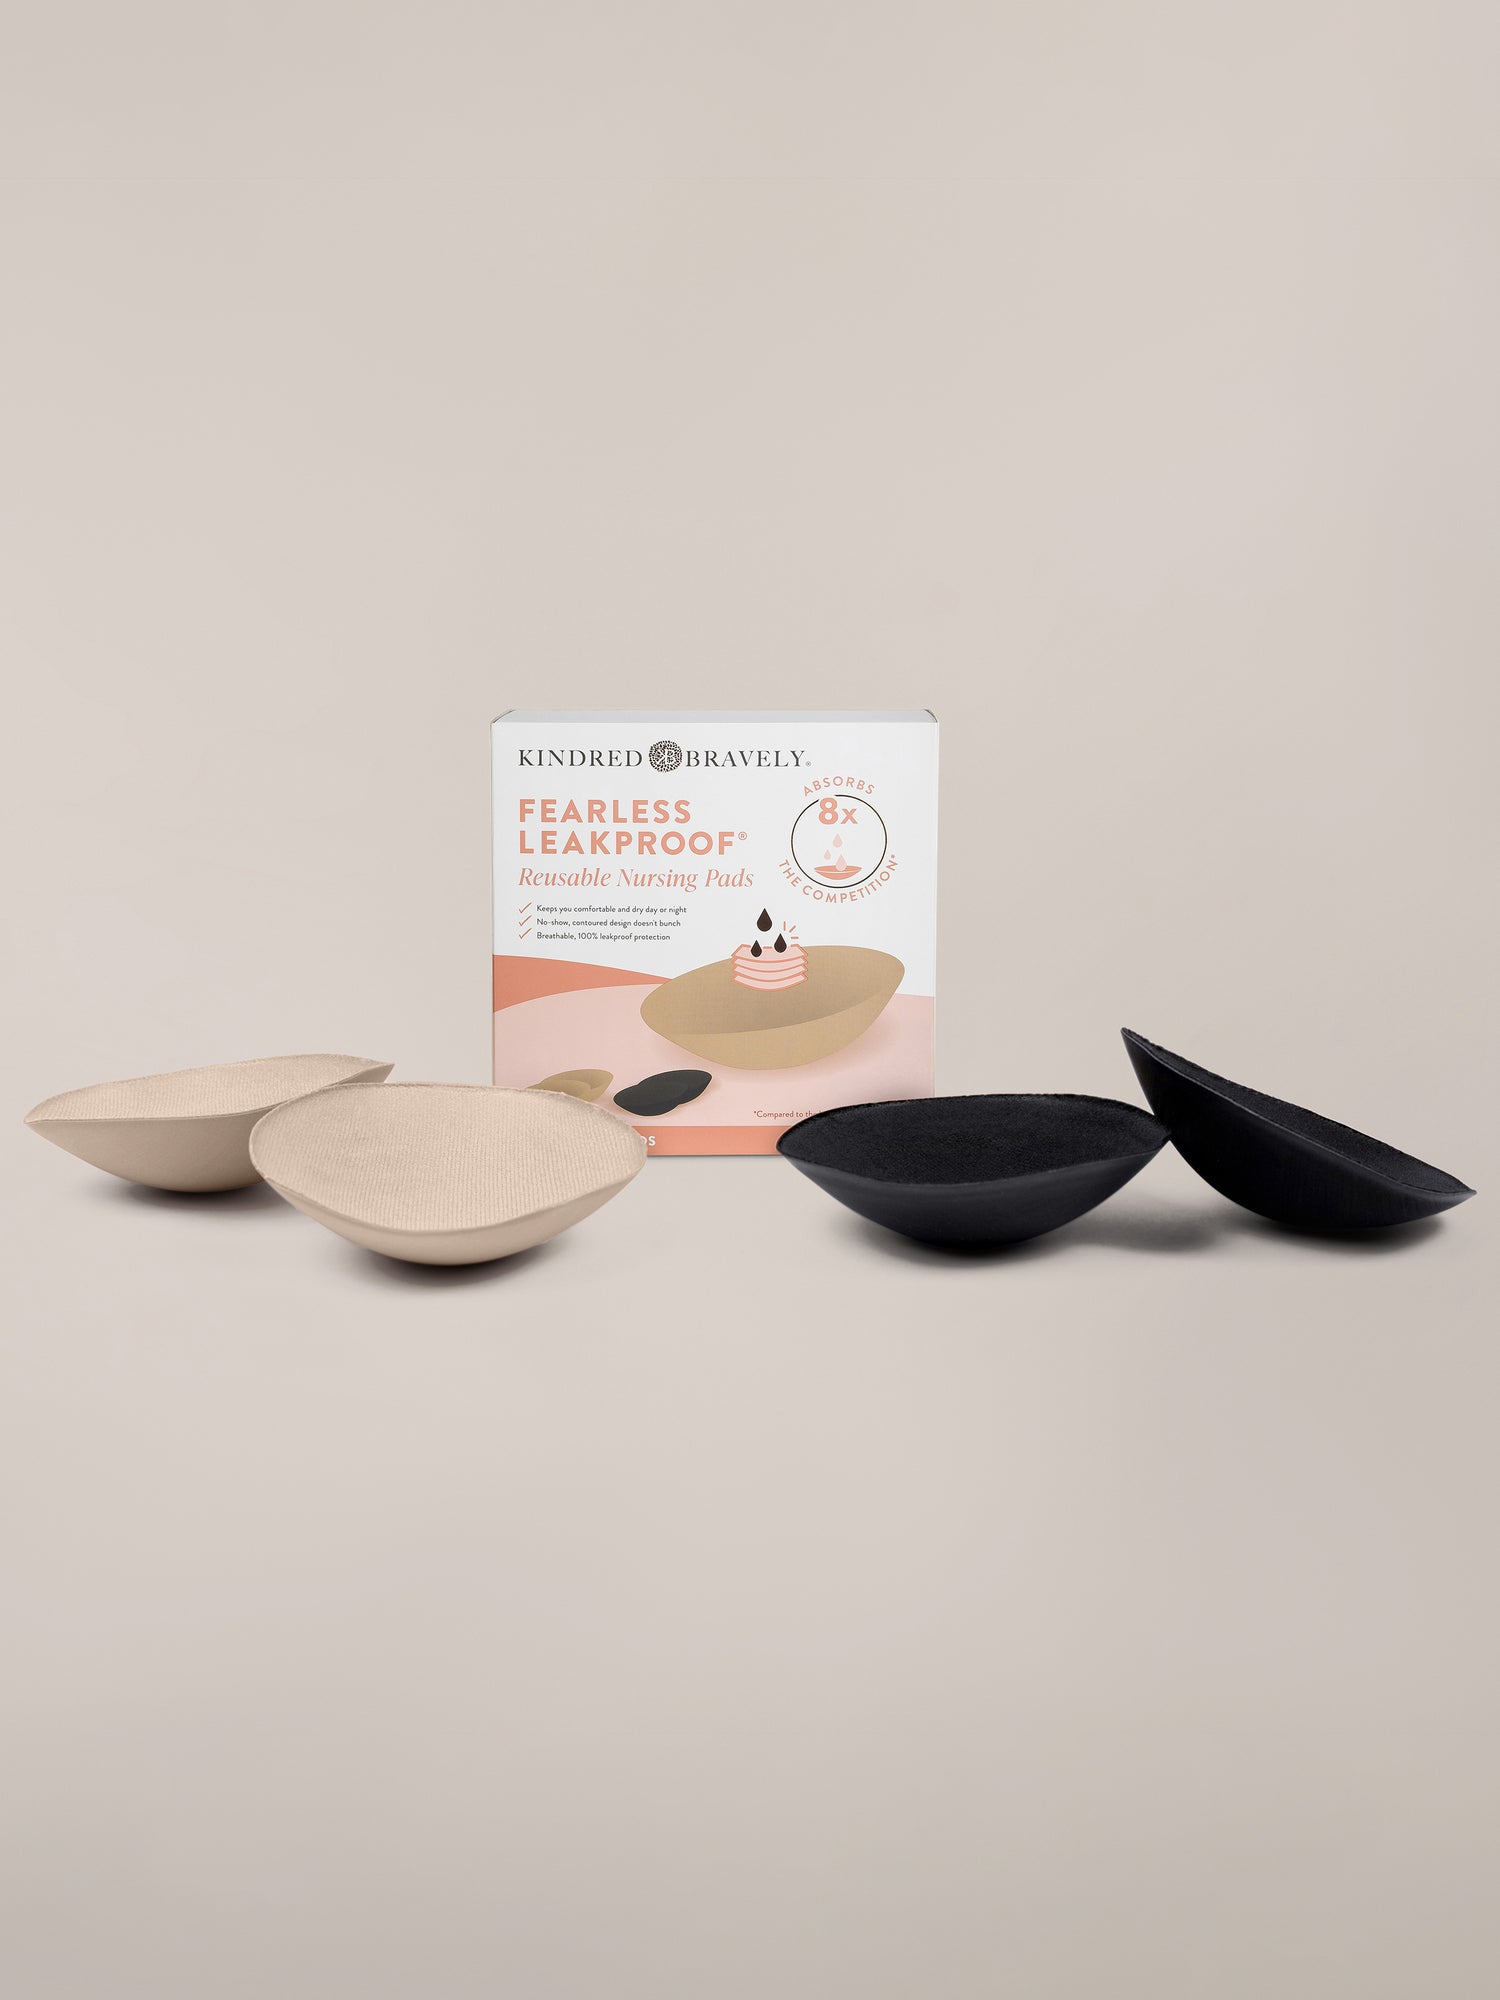 Flat lay image showing the Fearless Leakproof® Reusable Nursing Pads in Black & Beige against an off white background. 